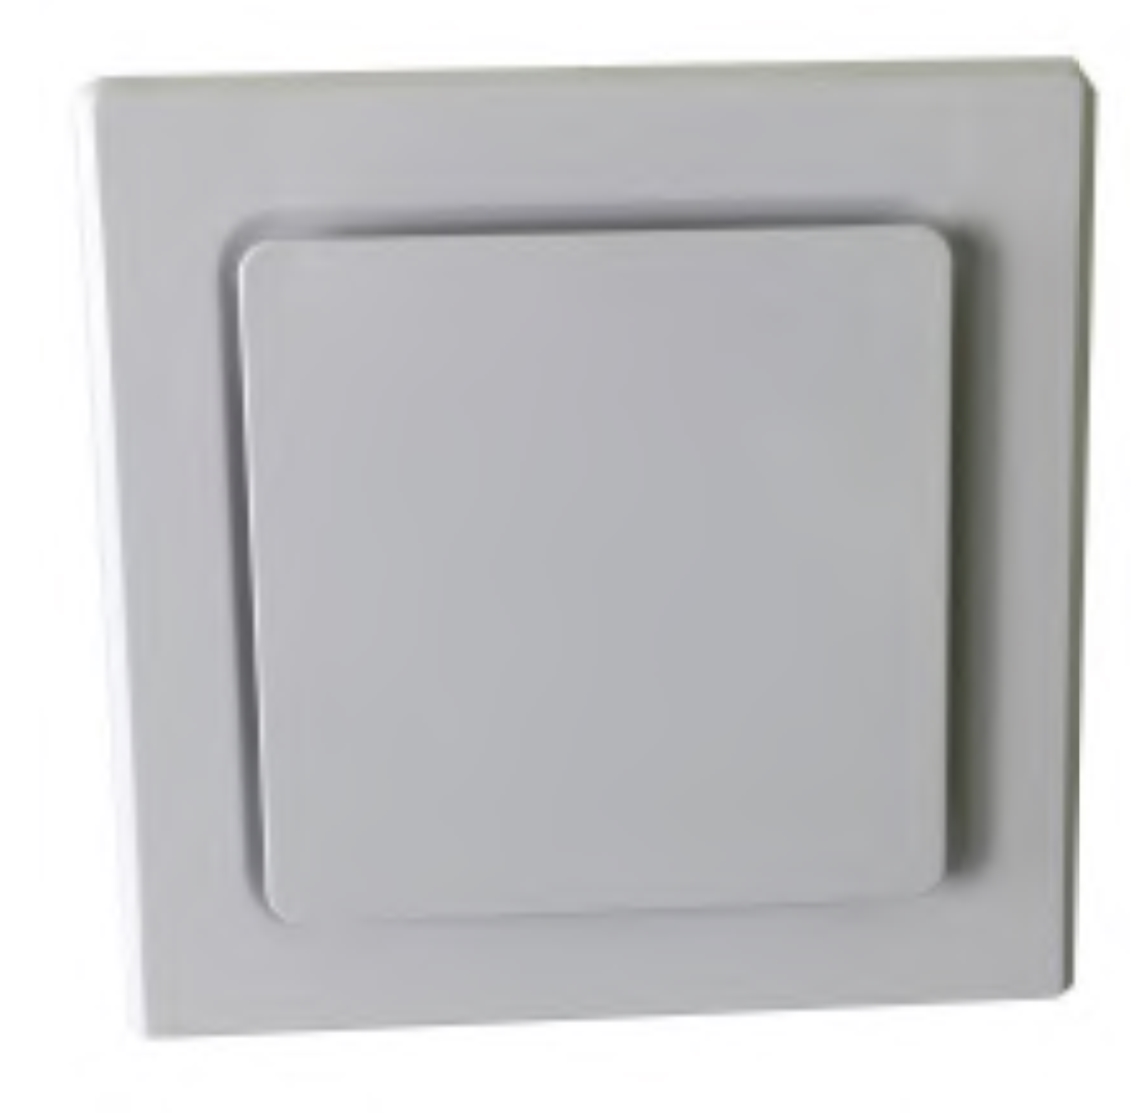 Square 8 Inch high efficiency exhaust fan excellent air flow of